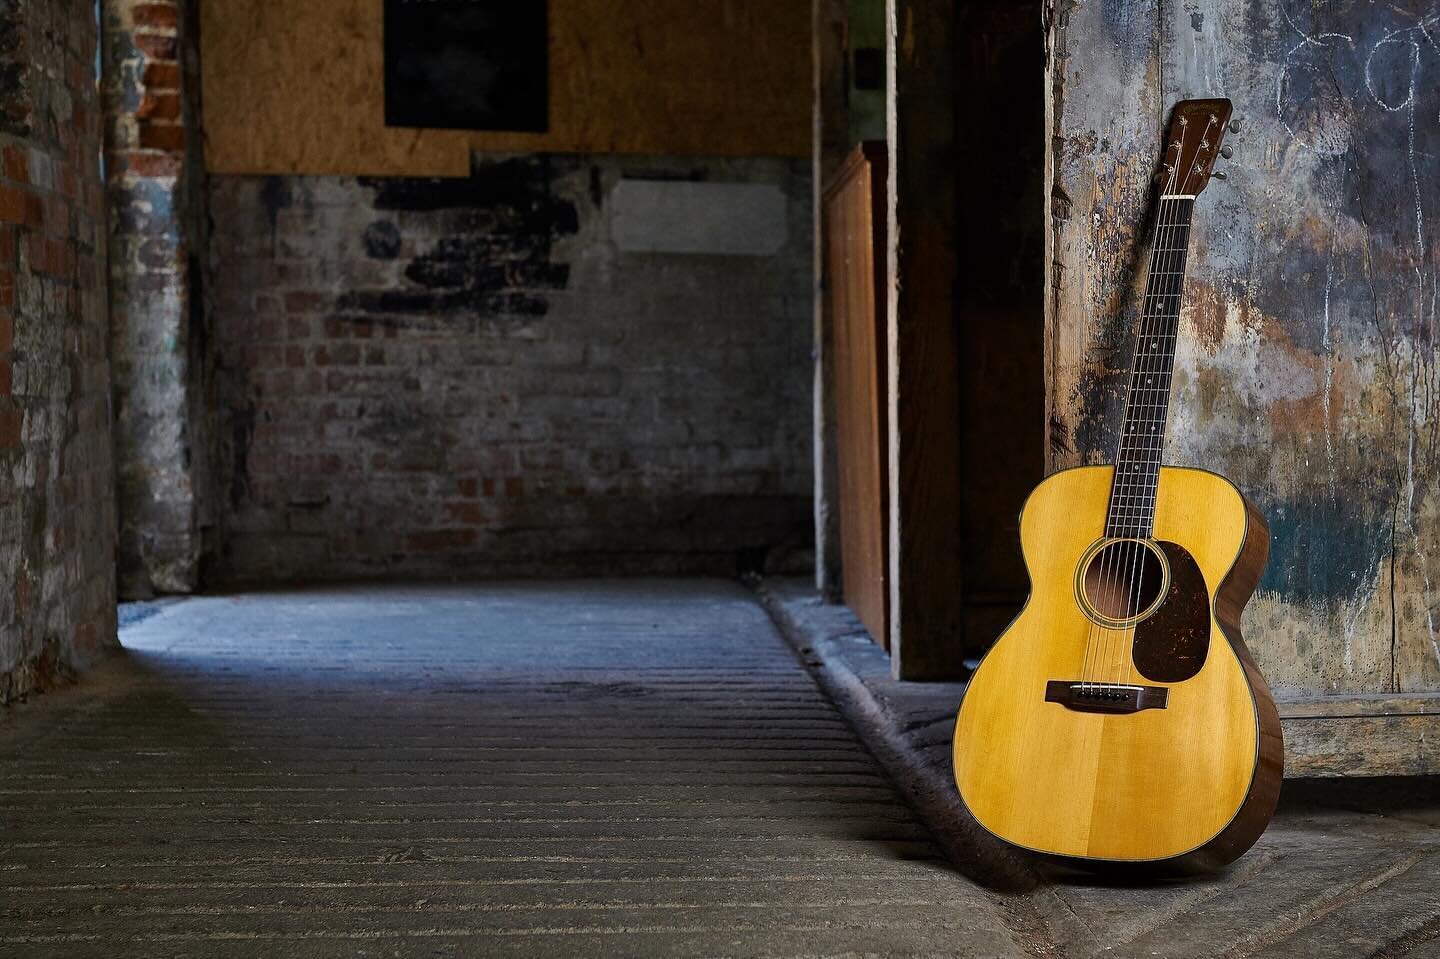 Barn find. Well not quite but a barn quite suits it. This is one of my personal guitars, a &lsquo;53 Martin 000-18 which I&rsquo;ve owned for 20 years now. It&rsquo;s such a sweet sounding guitar, probably the best acoustic I&rsquo;ve heard so far - 